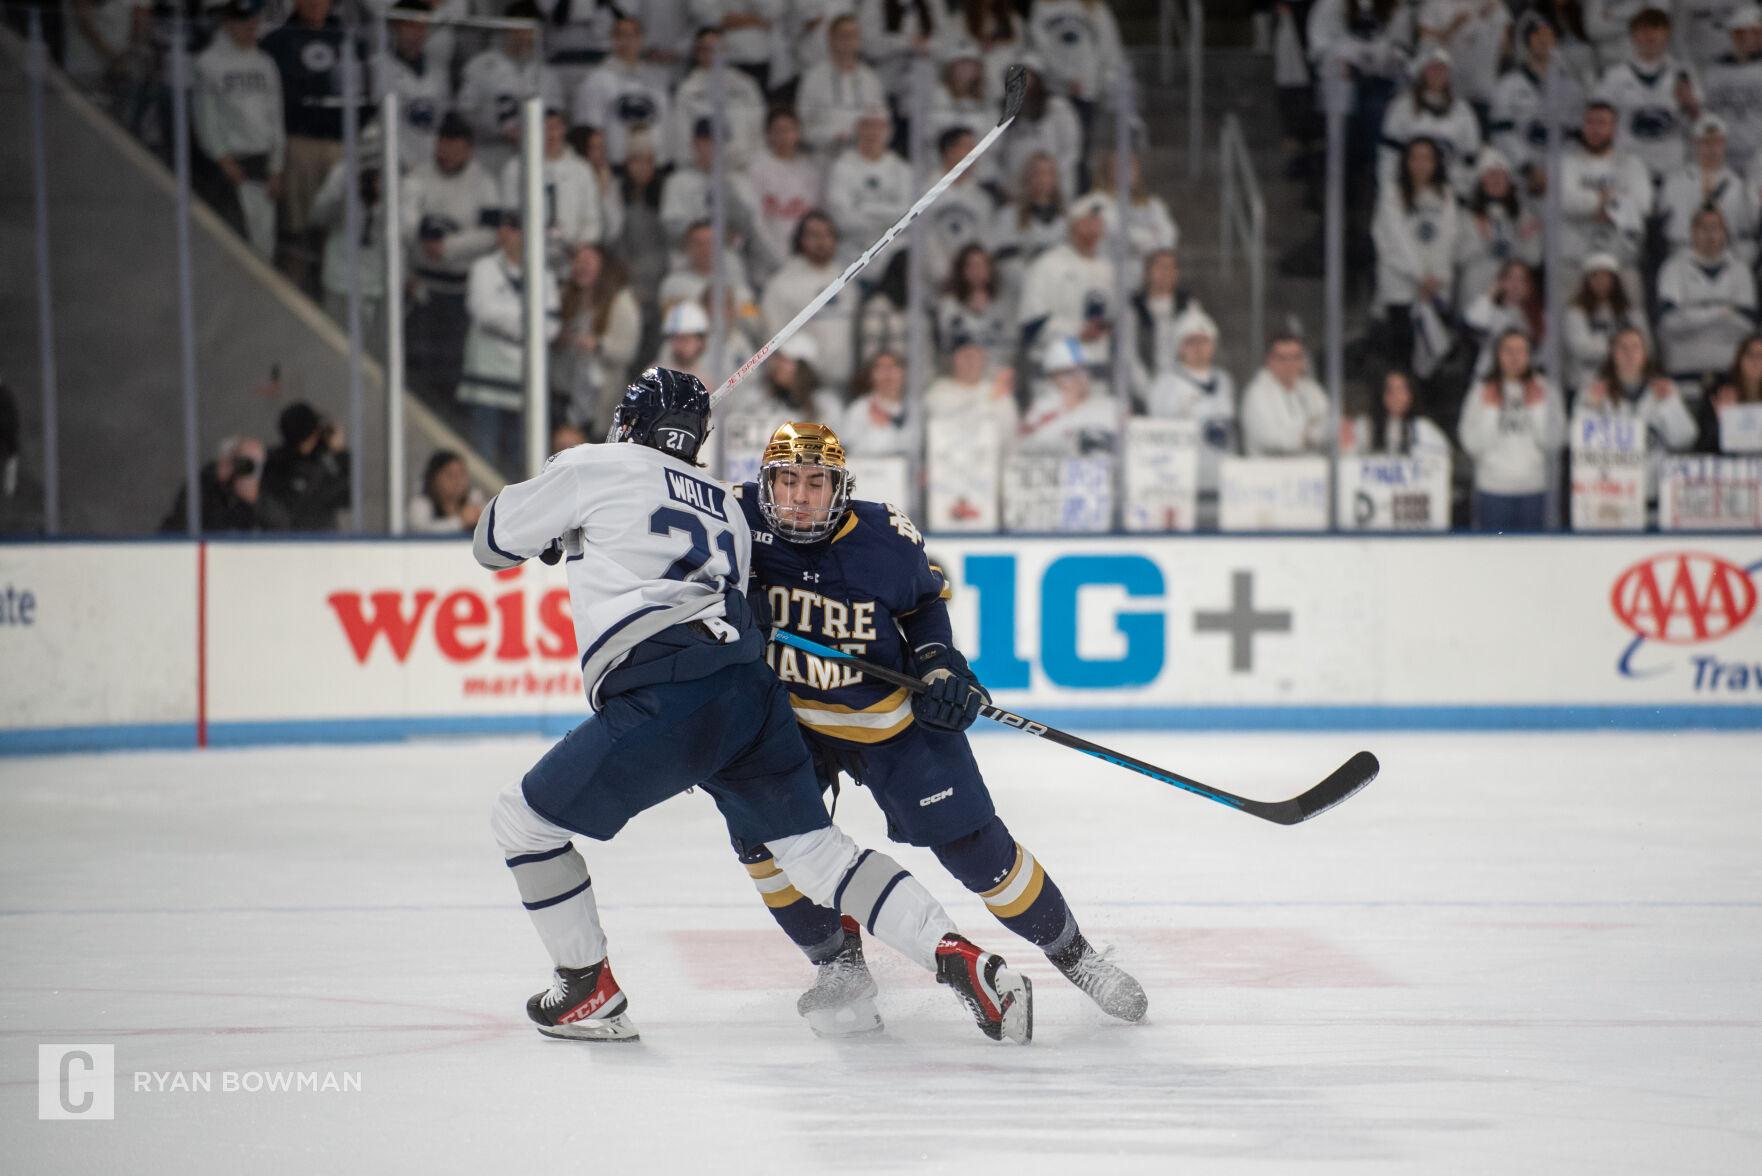 Penn State menu2019s hockey slips in latest USCHO poll after dropping pair of games to Michigan